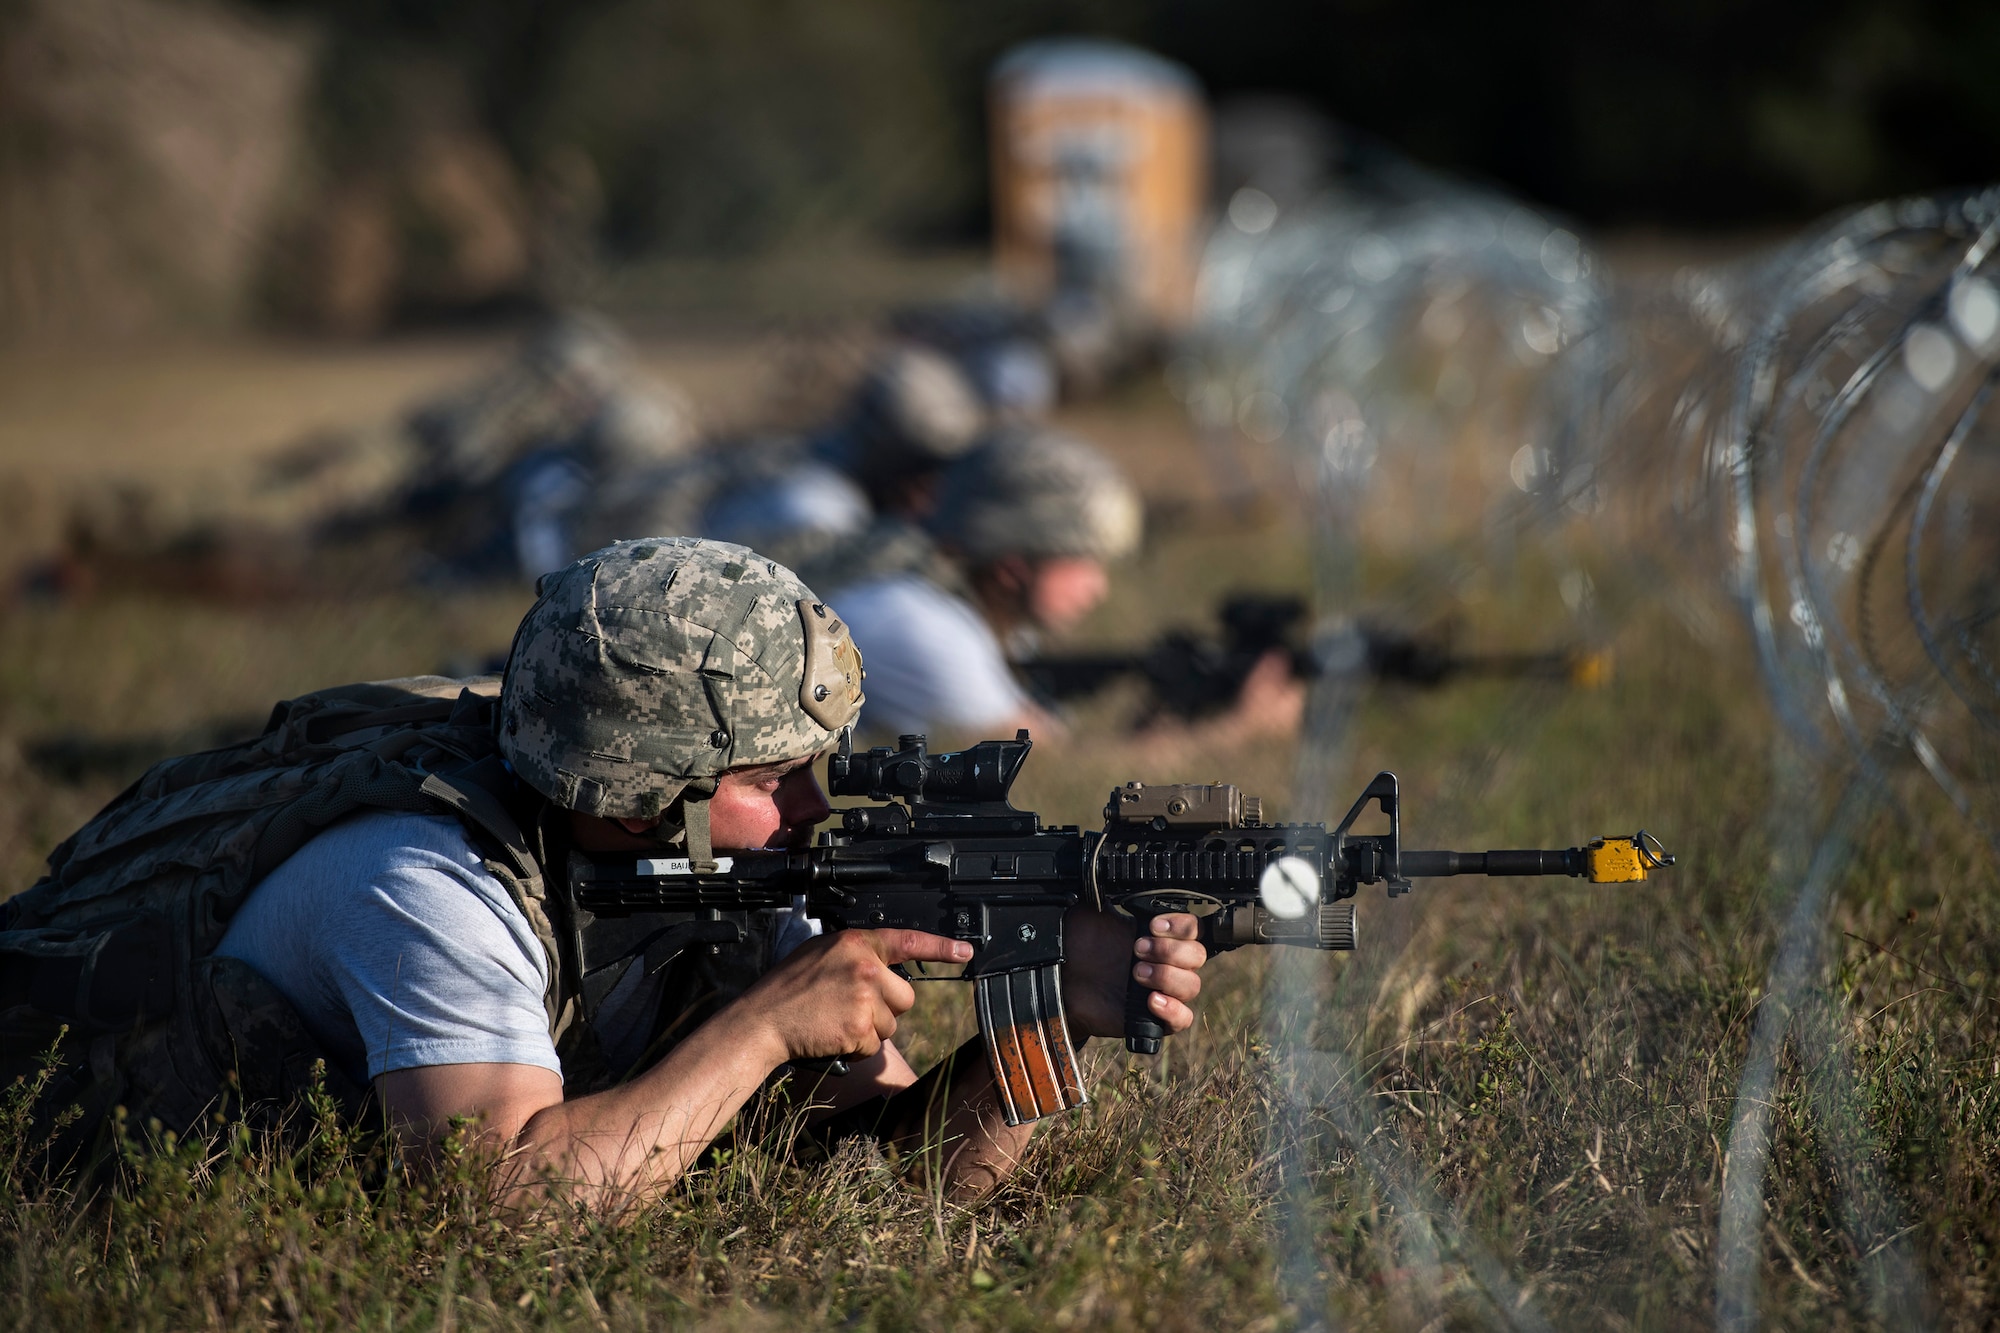 Staff Sgt. Joshua Bauer, 822d Base Defense Squadron fireteam leader, secures his sector of a defense fighting position during a Mission Readiness Exercise, March 11, 2017, at Avon Park Air Force Range, Fla. The MRX took place March 2-13 and ensured the 822d BDS could efficiently deploy anywhere in the world in less than 72 hours. The MRX took place March 2-13 and ensured the 822d BDS could efficiently deploy anywhere in the world in less than 72 hours. During the two week MRX, the squadron was evaluated on its ability to set-up a bare base, effectively thwart enemy attacks, run a secure Tactical Operation Center and maintain positive relationships with villagers in surrounding areas. (U.S. Air Force Photo by Airman 1st Class Janiqua P. Robinson)